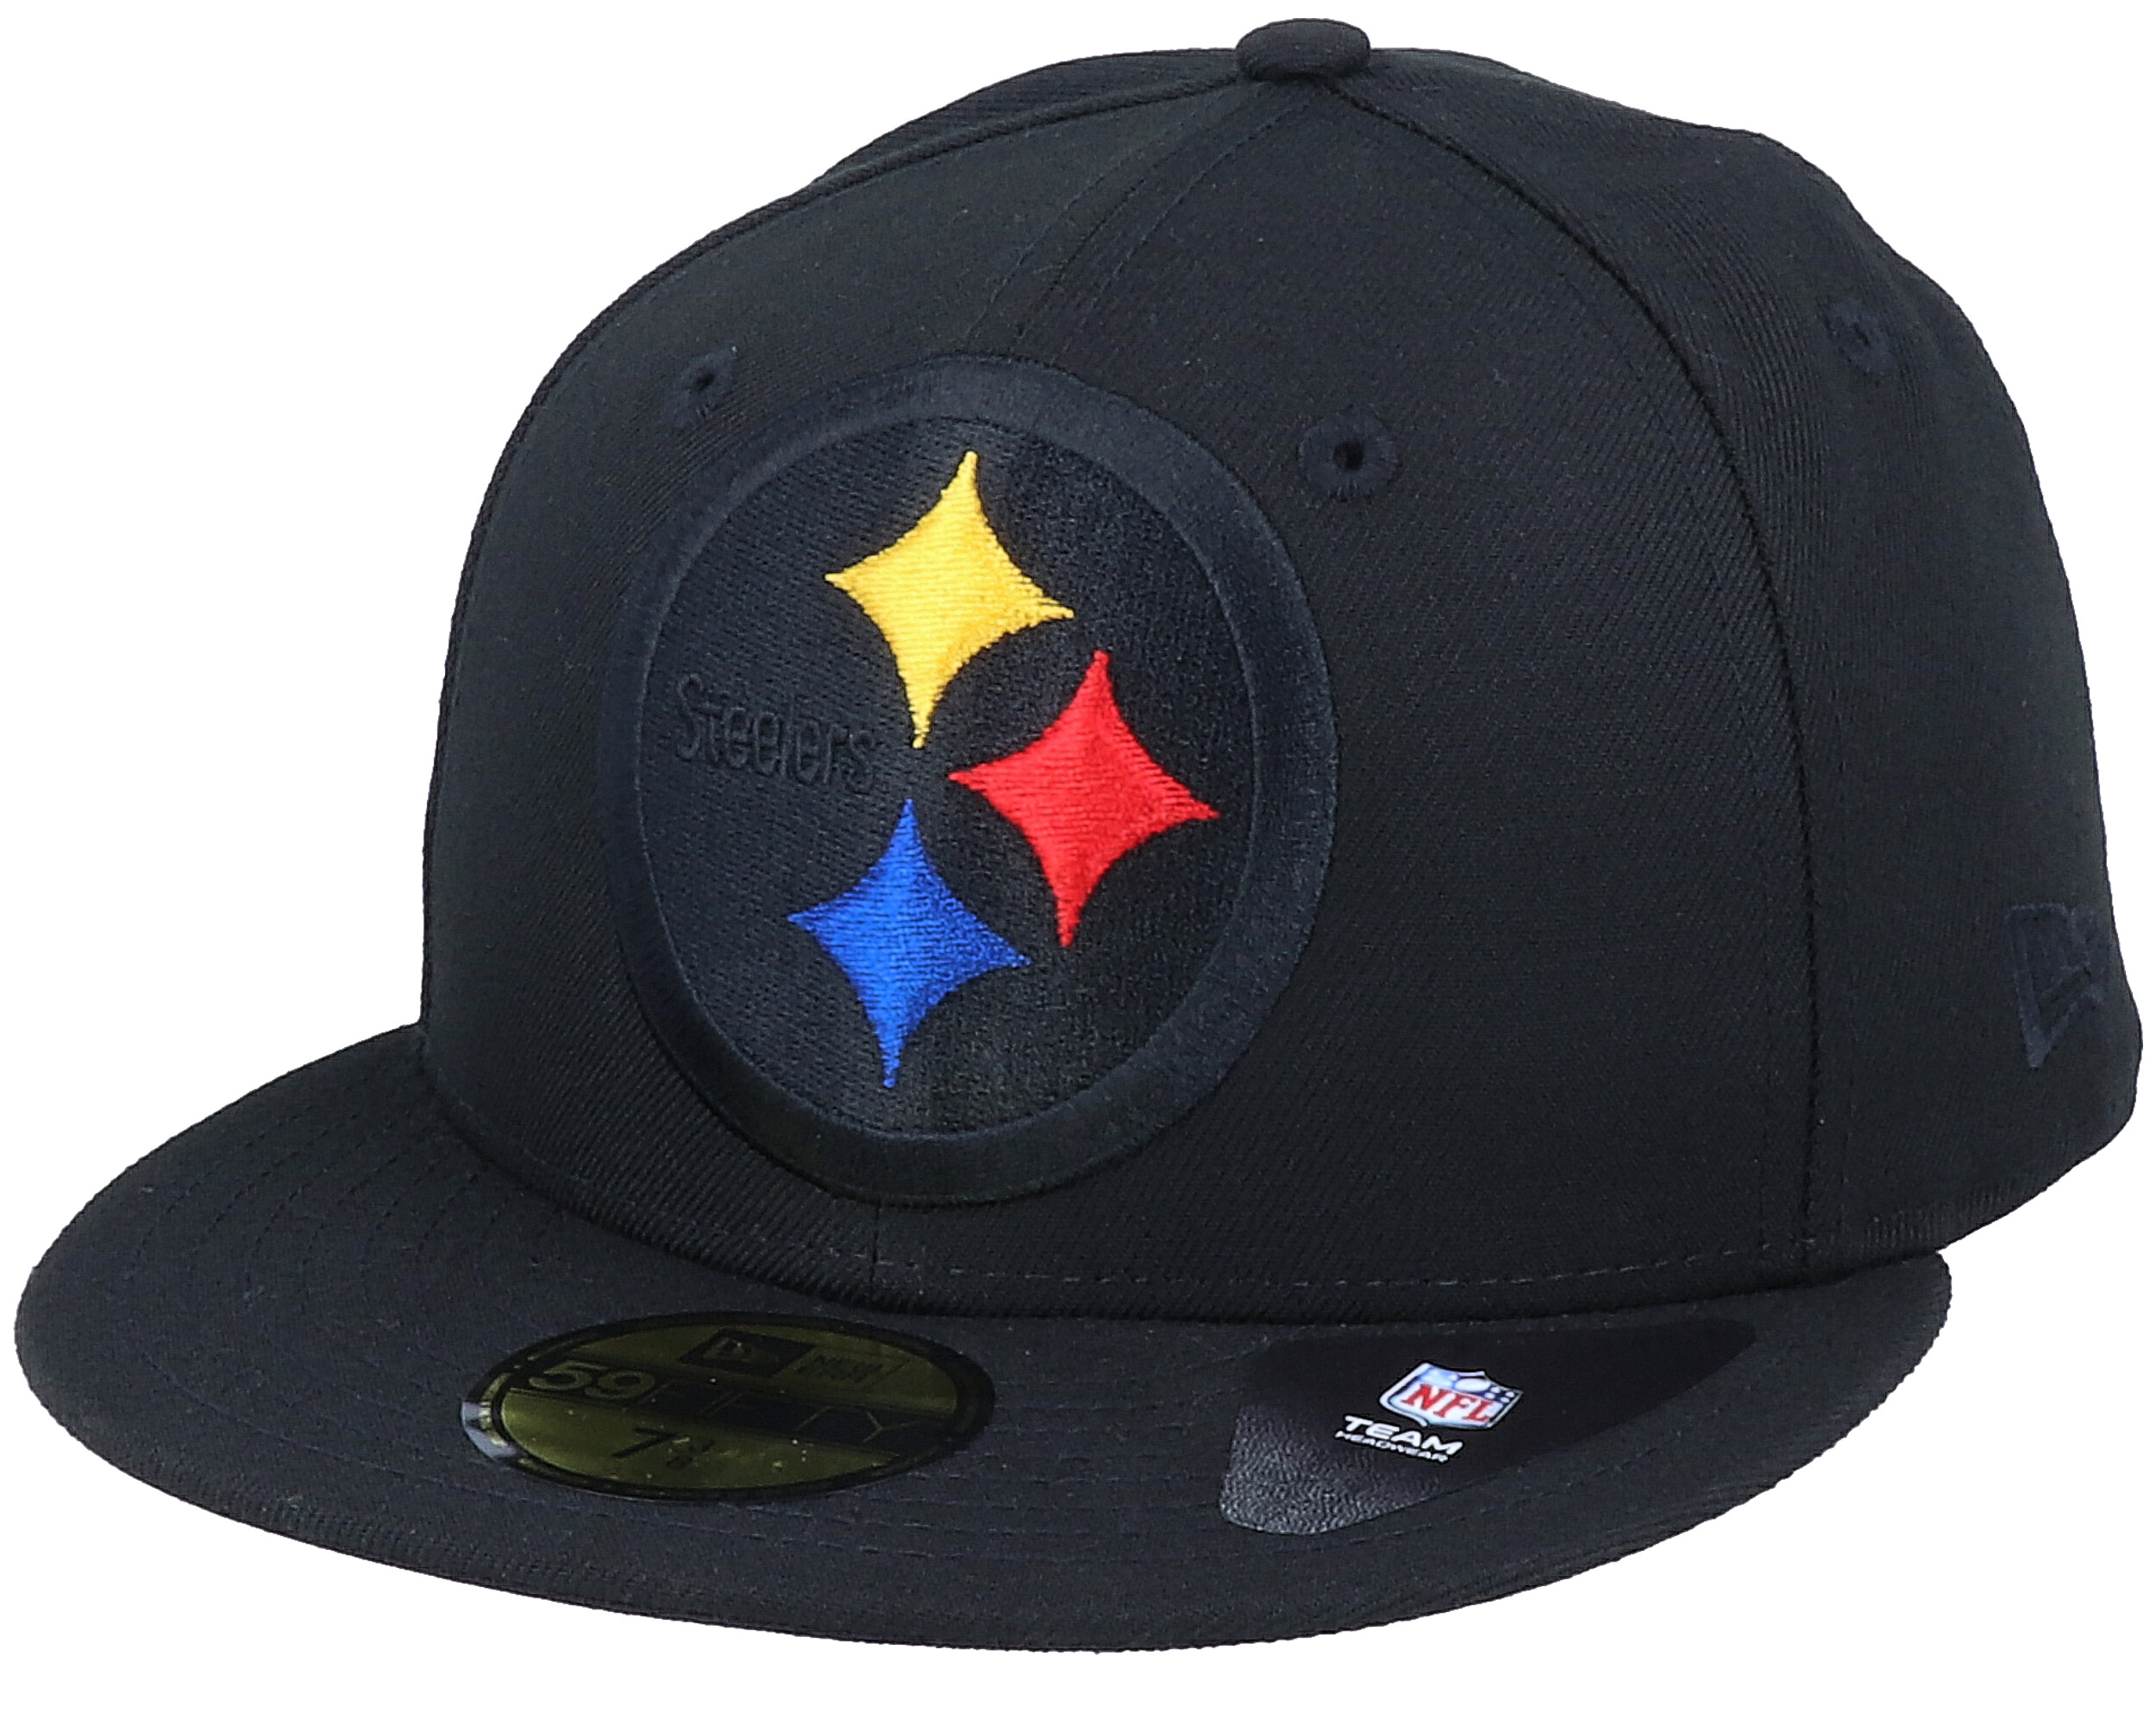 ELEMENTS Pittsburgh Steelers New Era 59Fifty Fitted Cap 